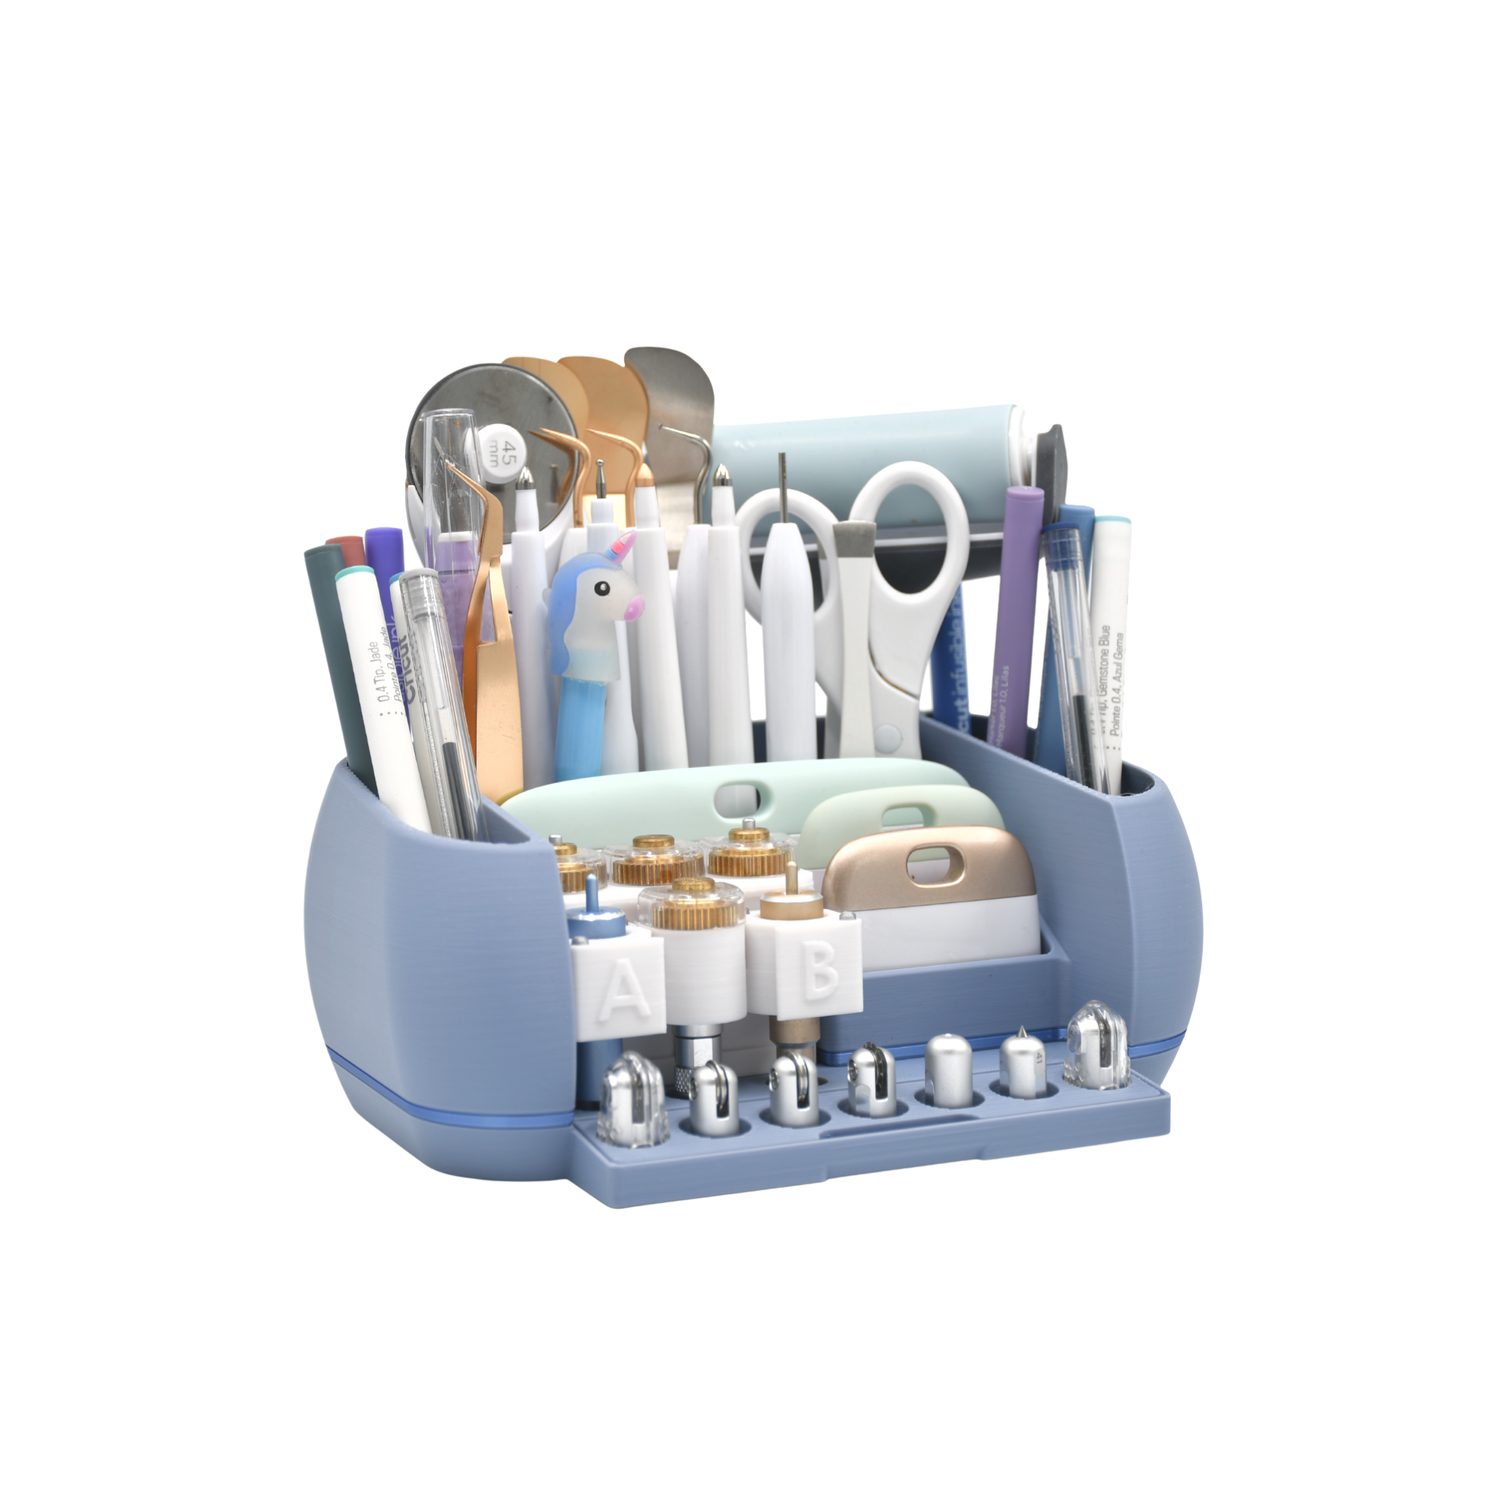 Tiffany's Maker 3 Caddy® - Worlds Most Adorable Caddy / Maker Tool